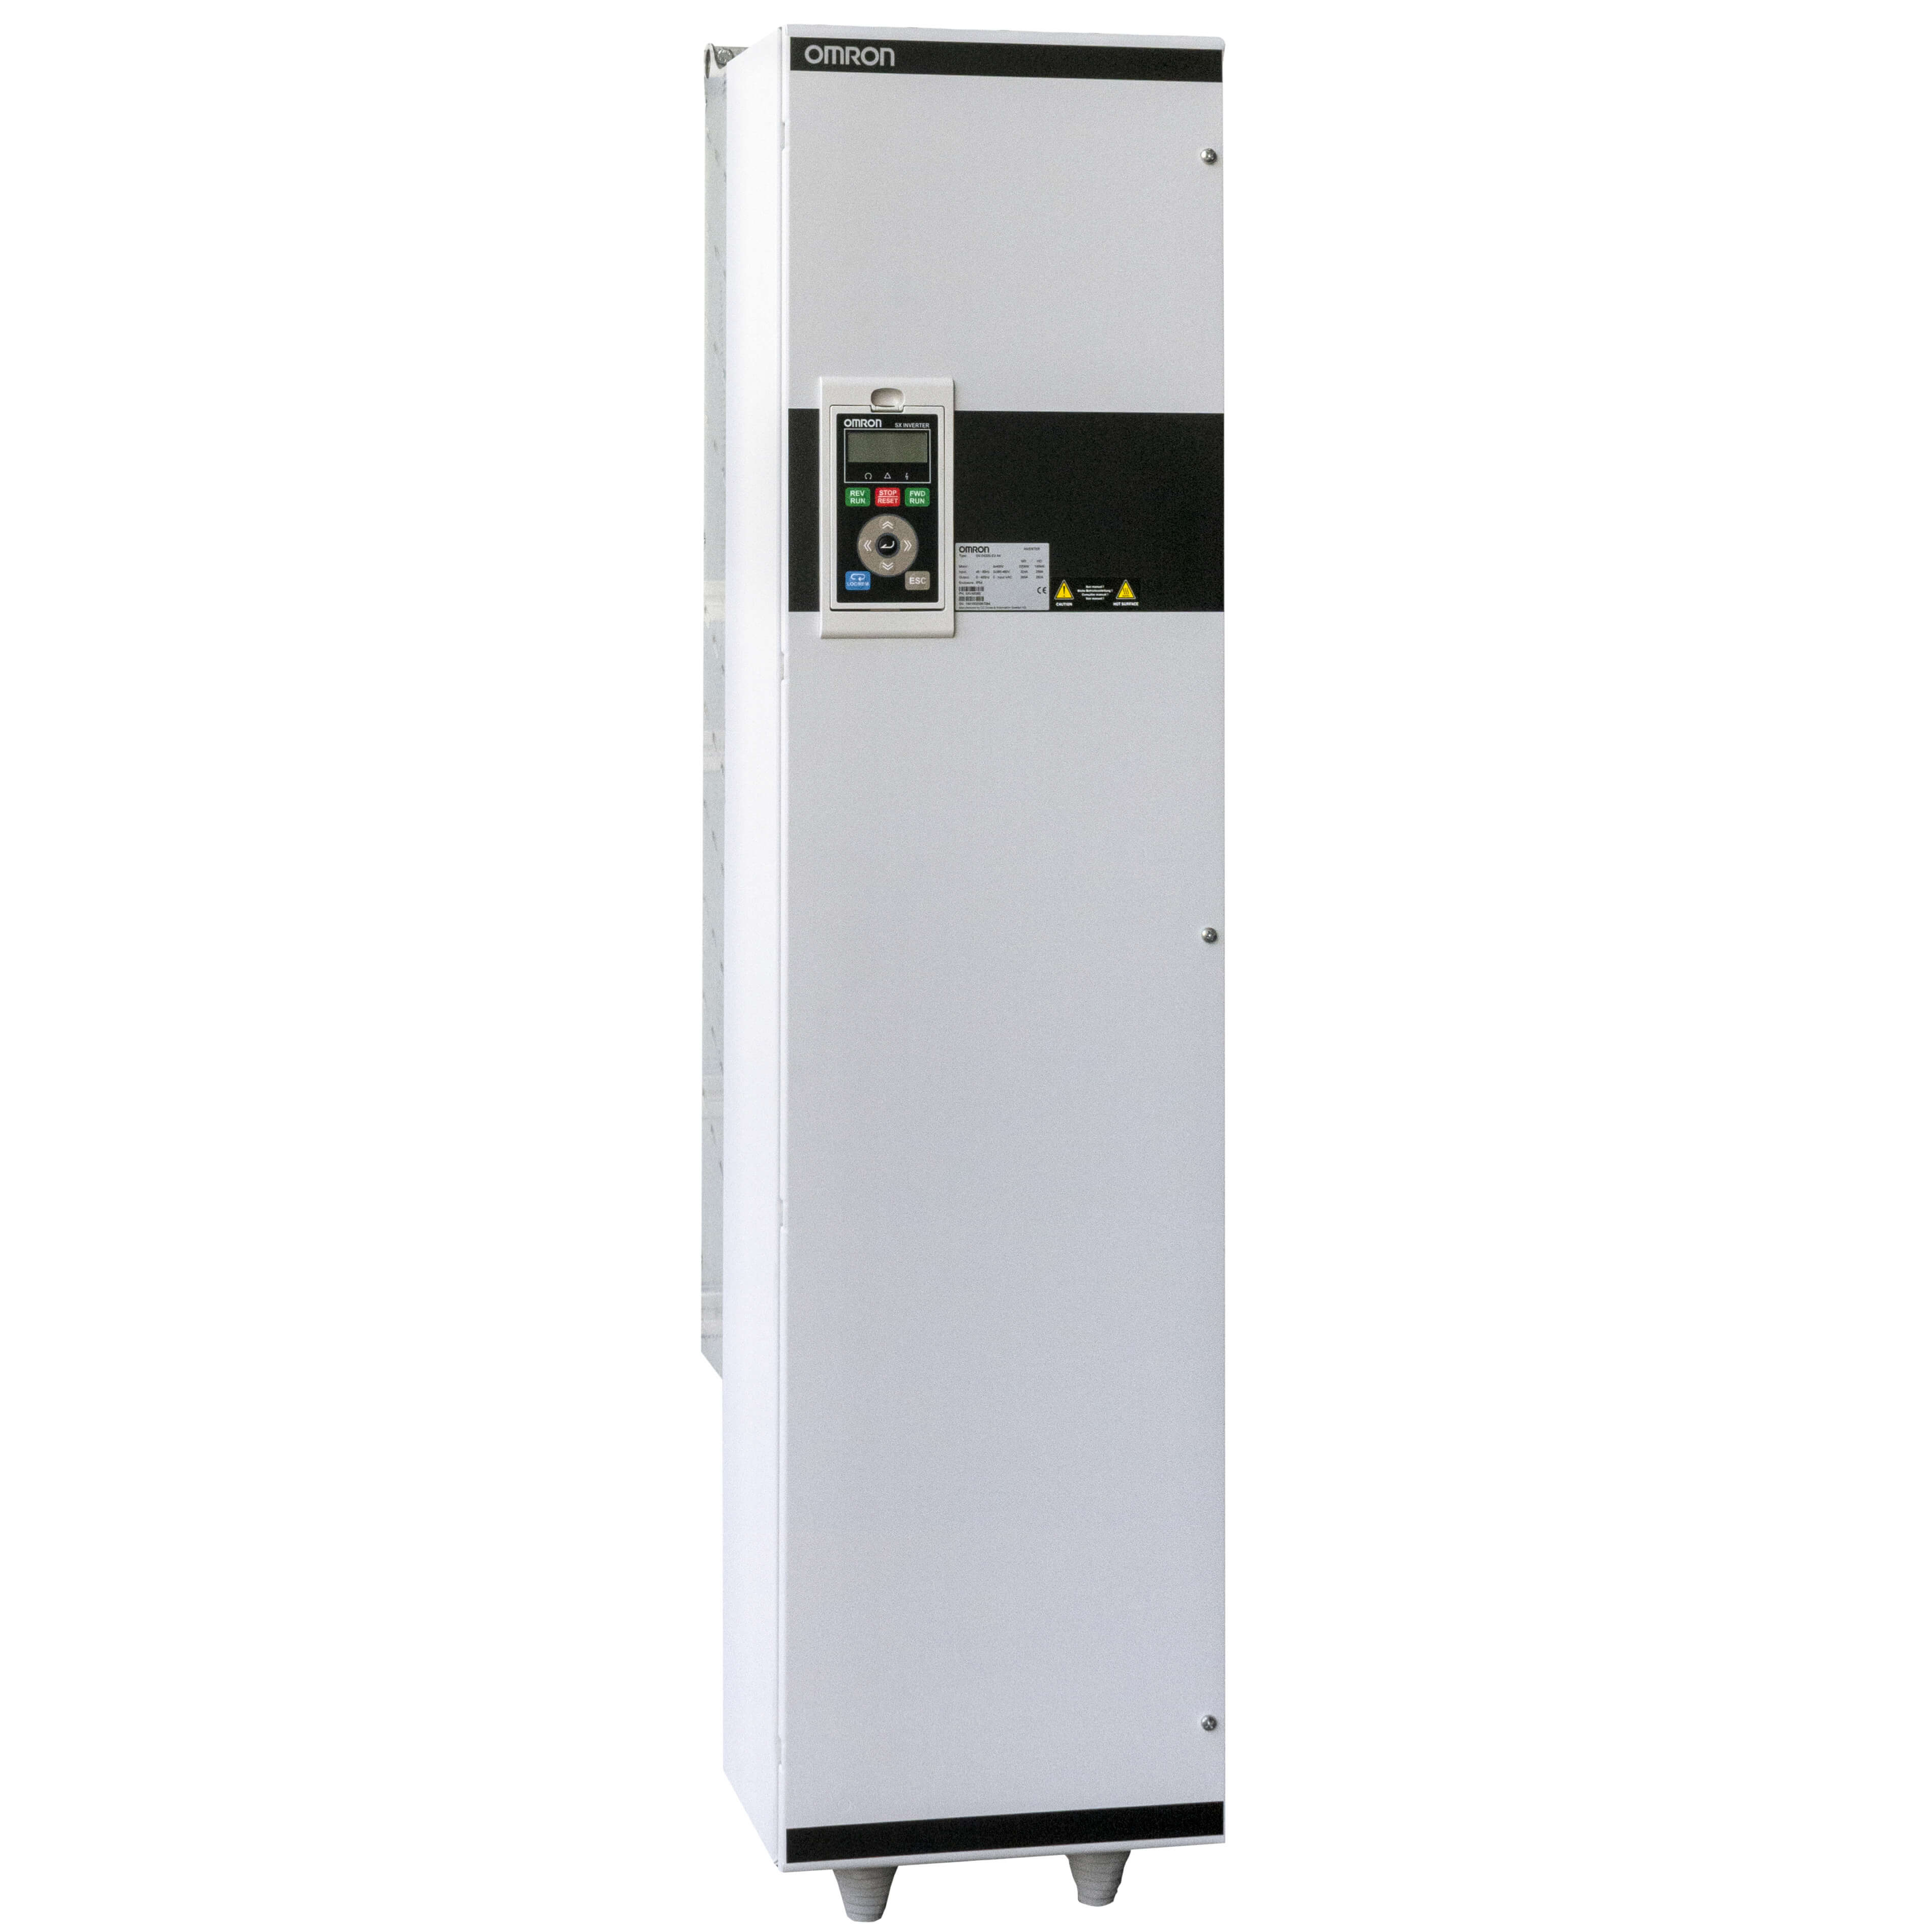 Frequency Inverter [SX]